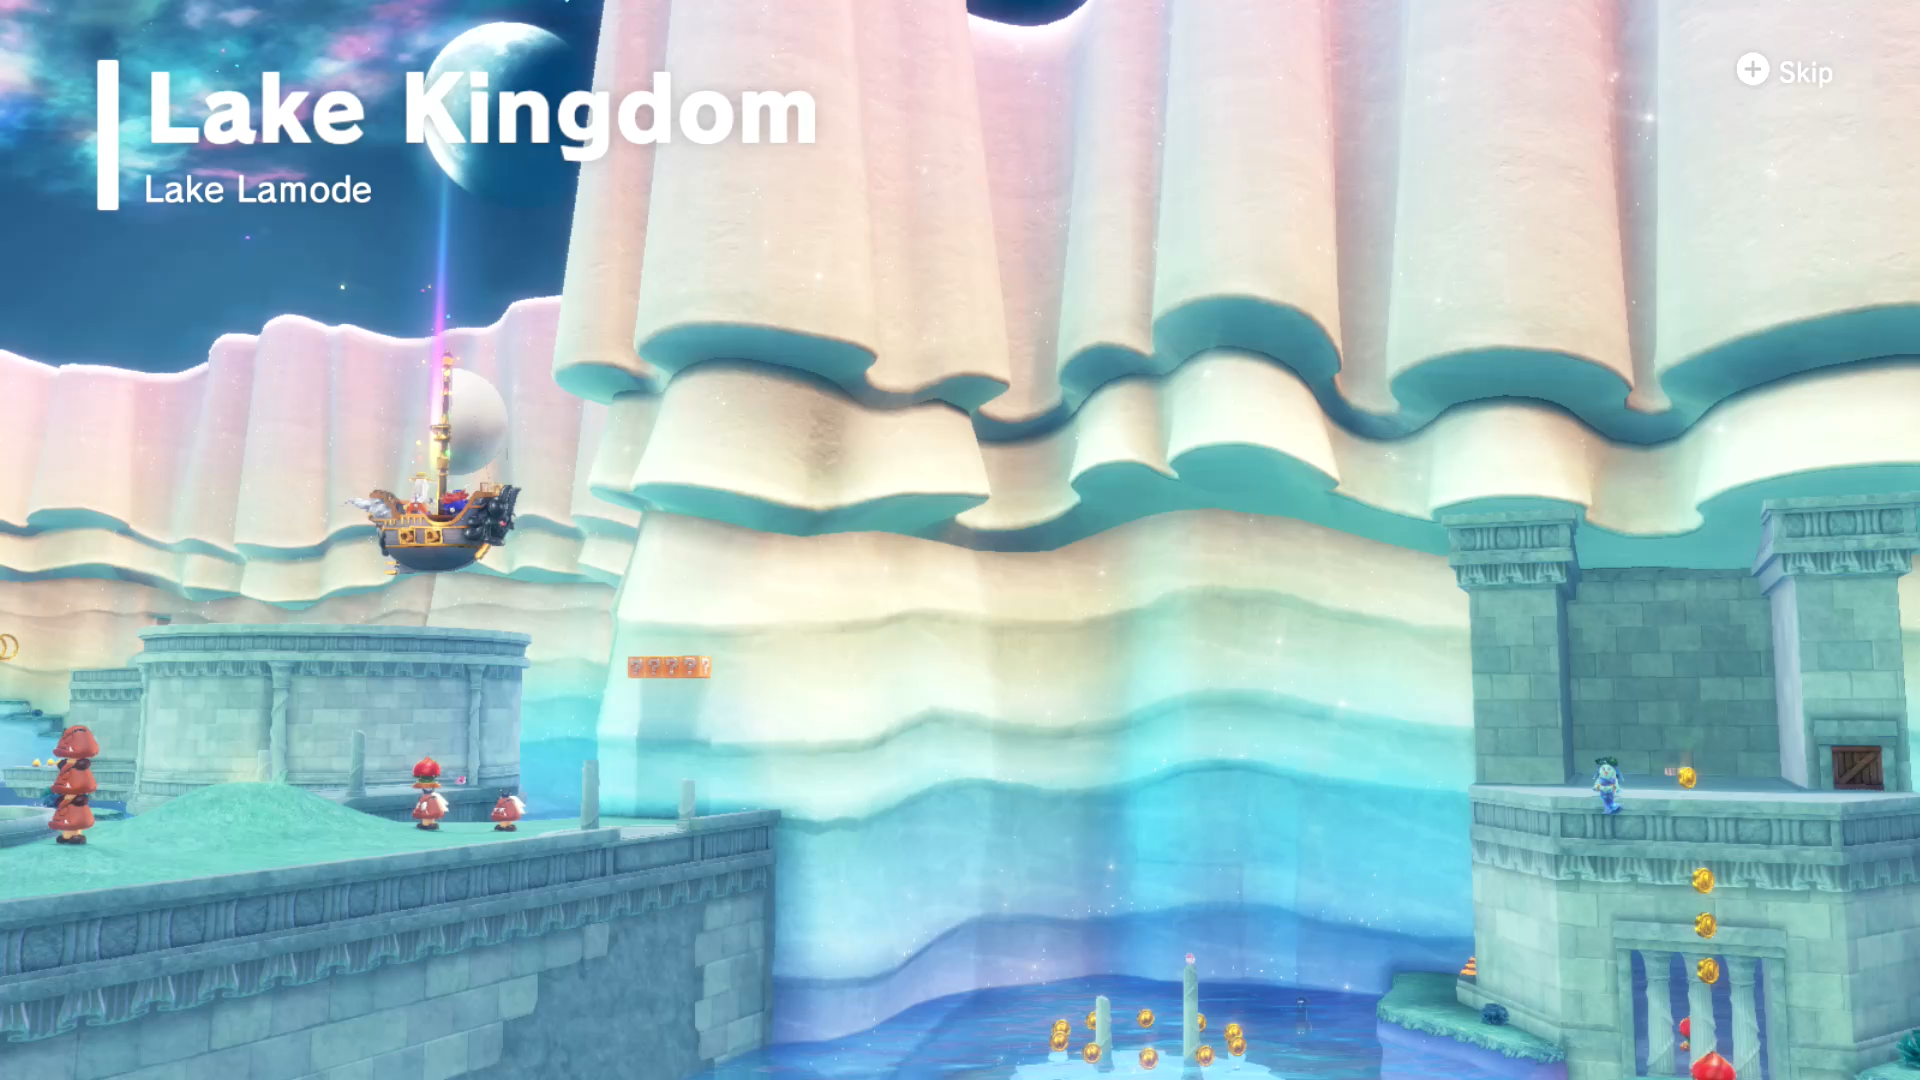 The Simple Trick To Finding All Of Super Mario Odyssey's Power Moons -  Guide